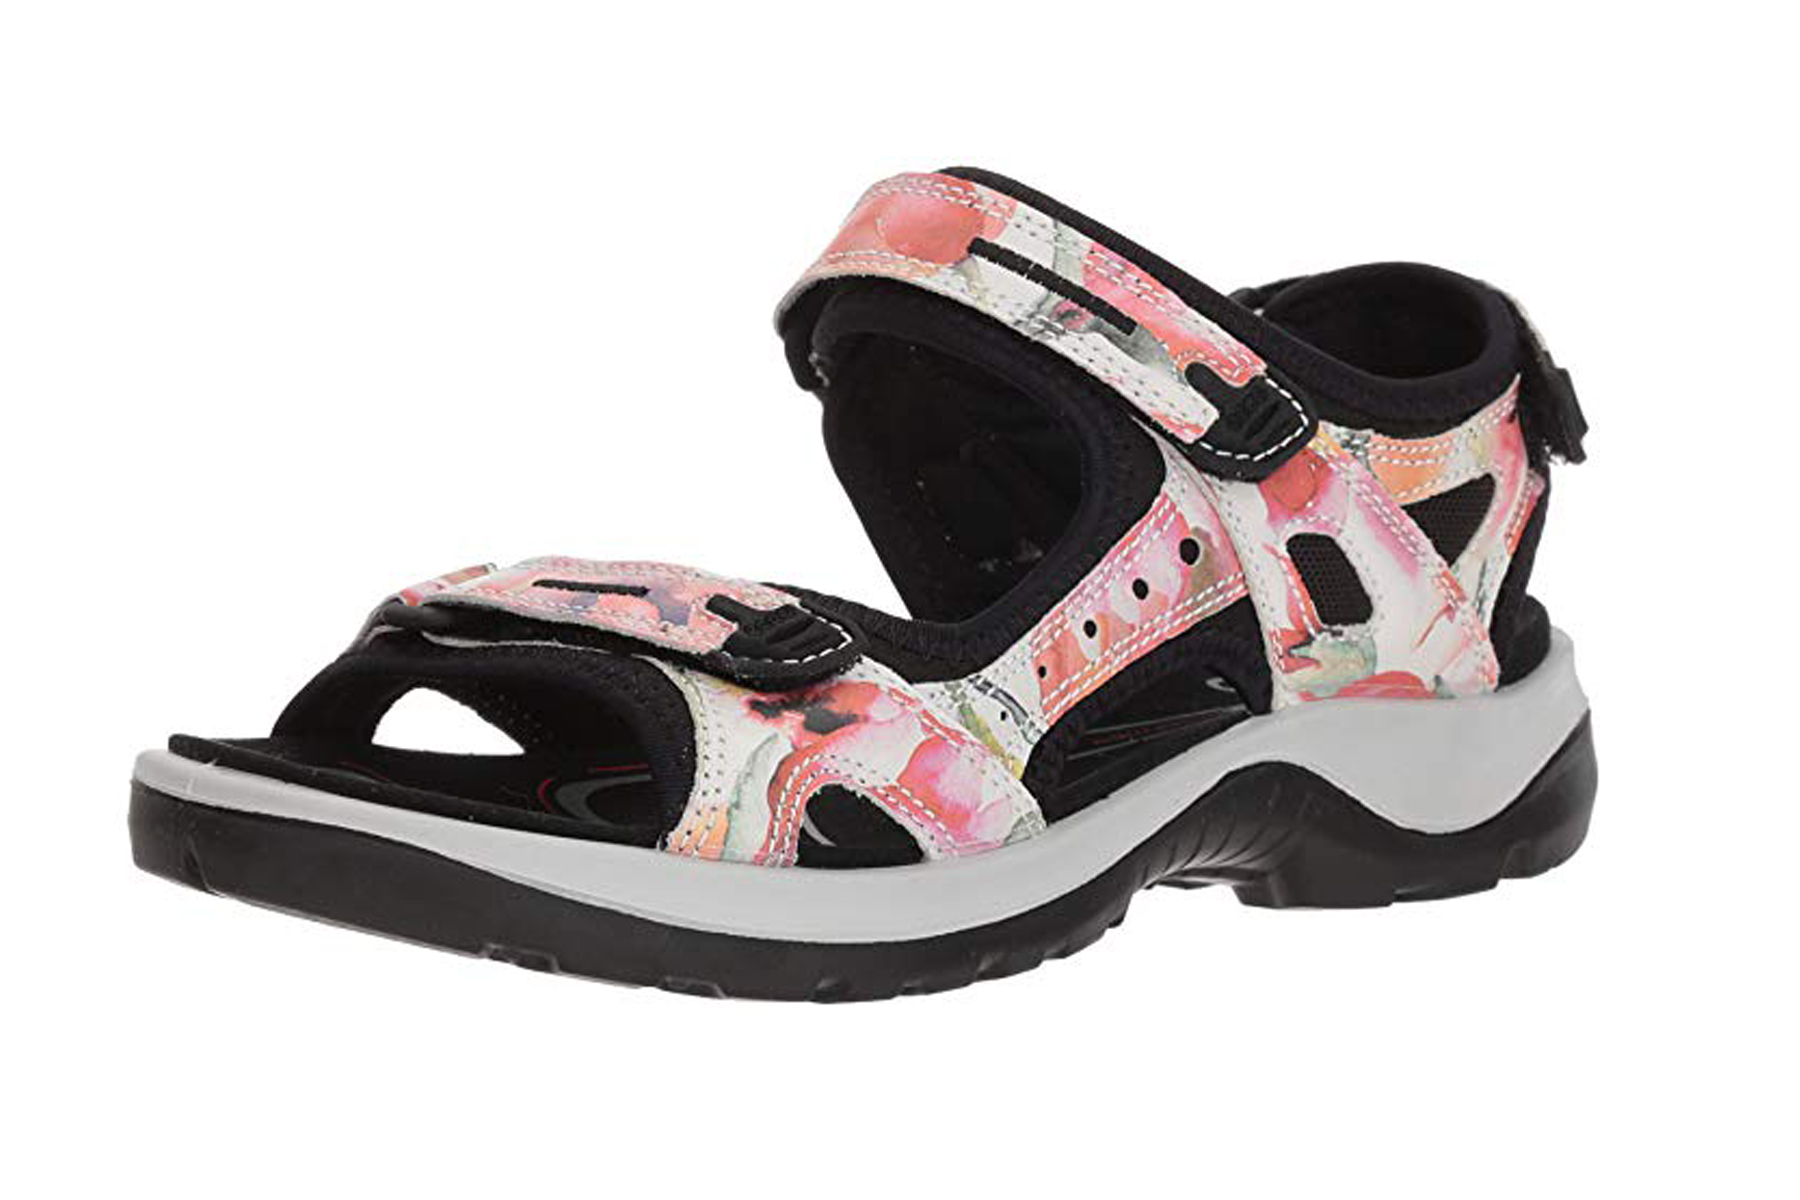 orthotic shoes and sandals